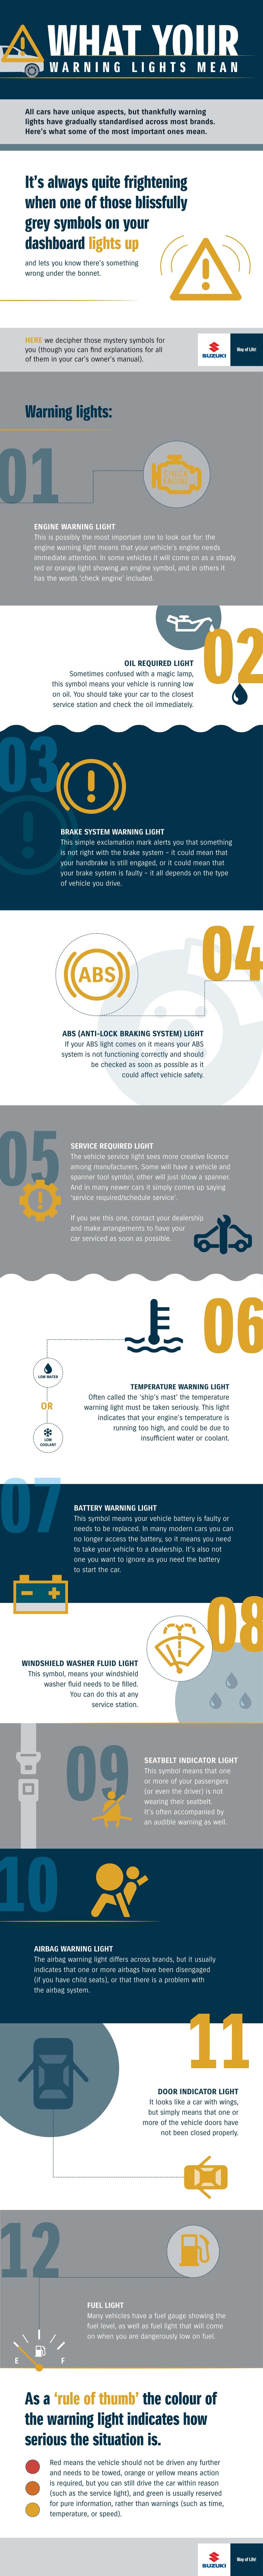 What your warning lights mean - infographic